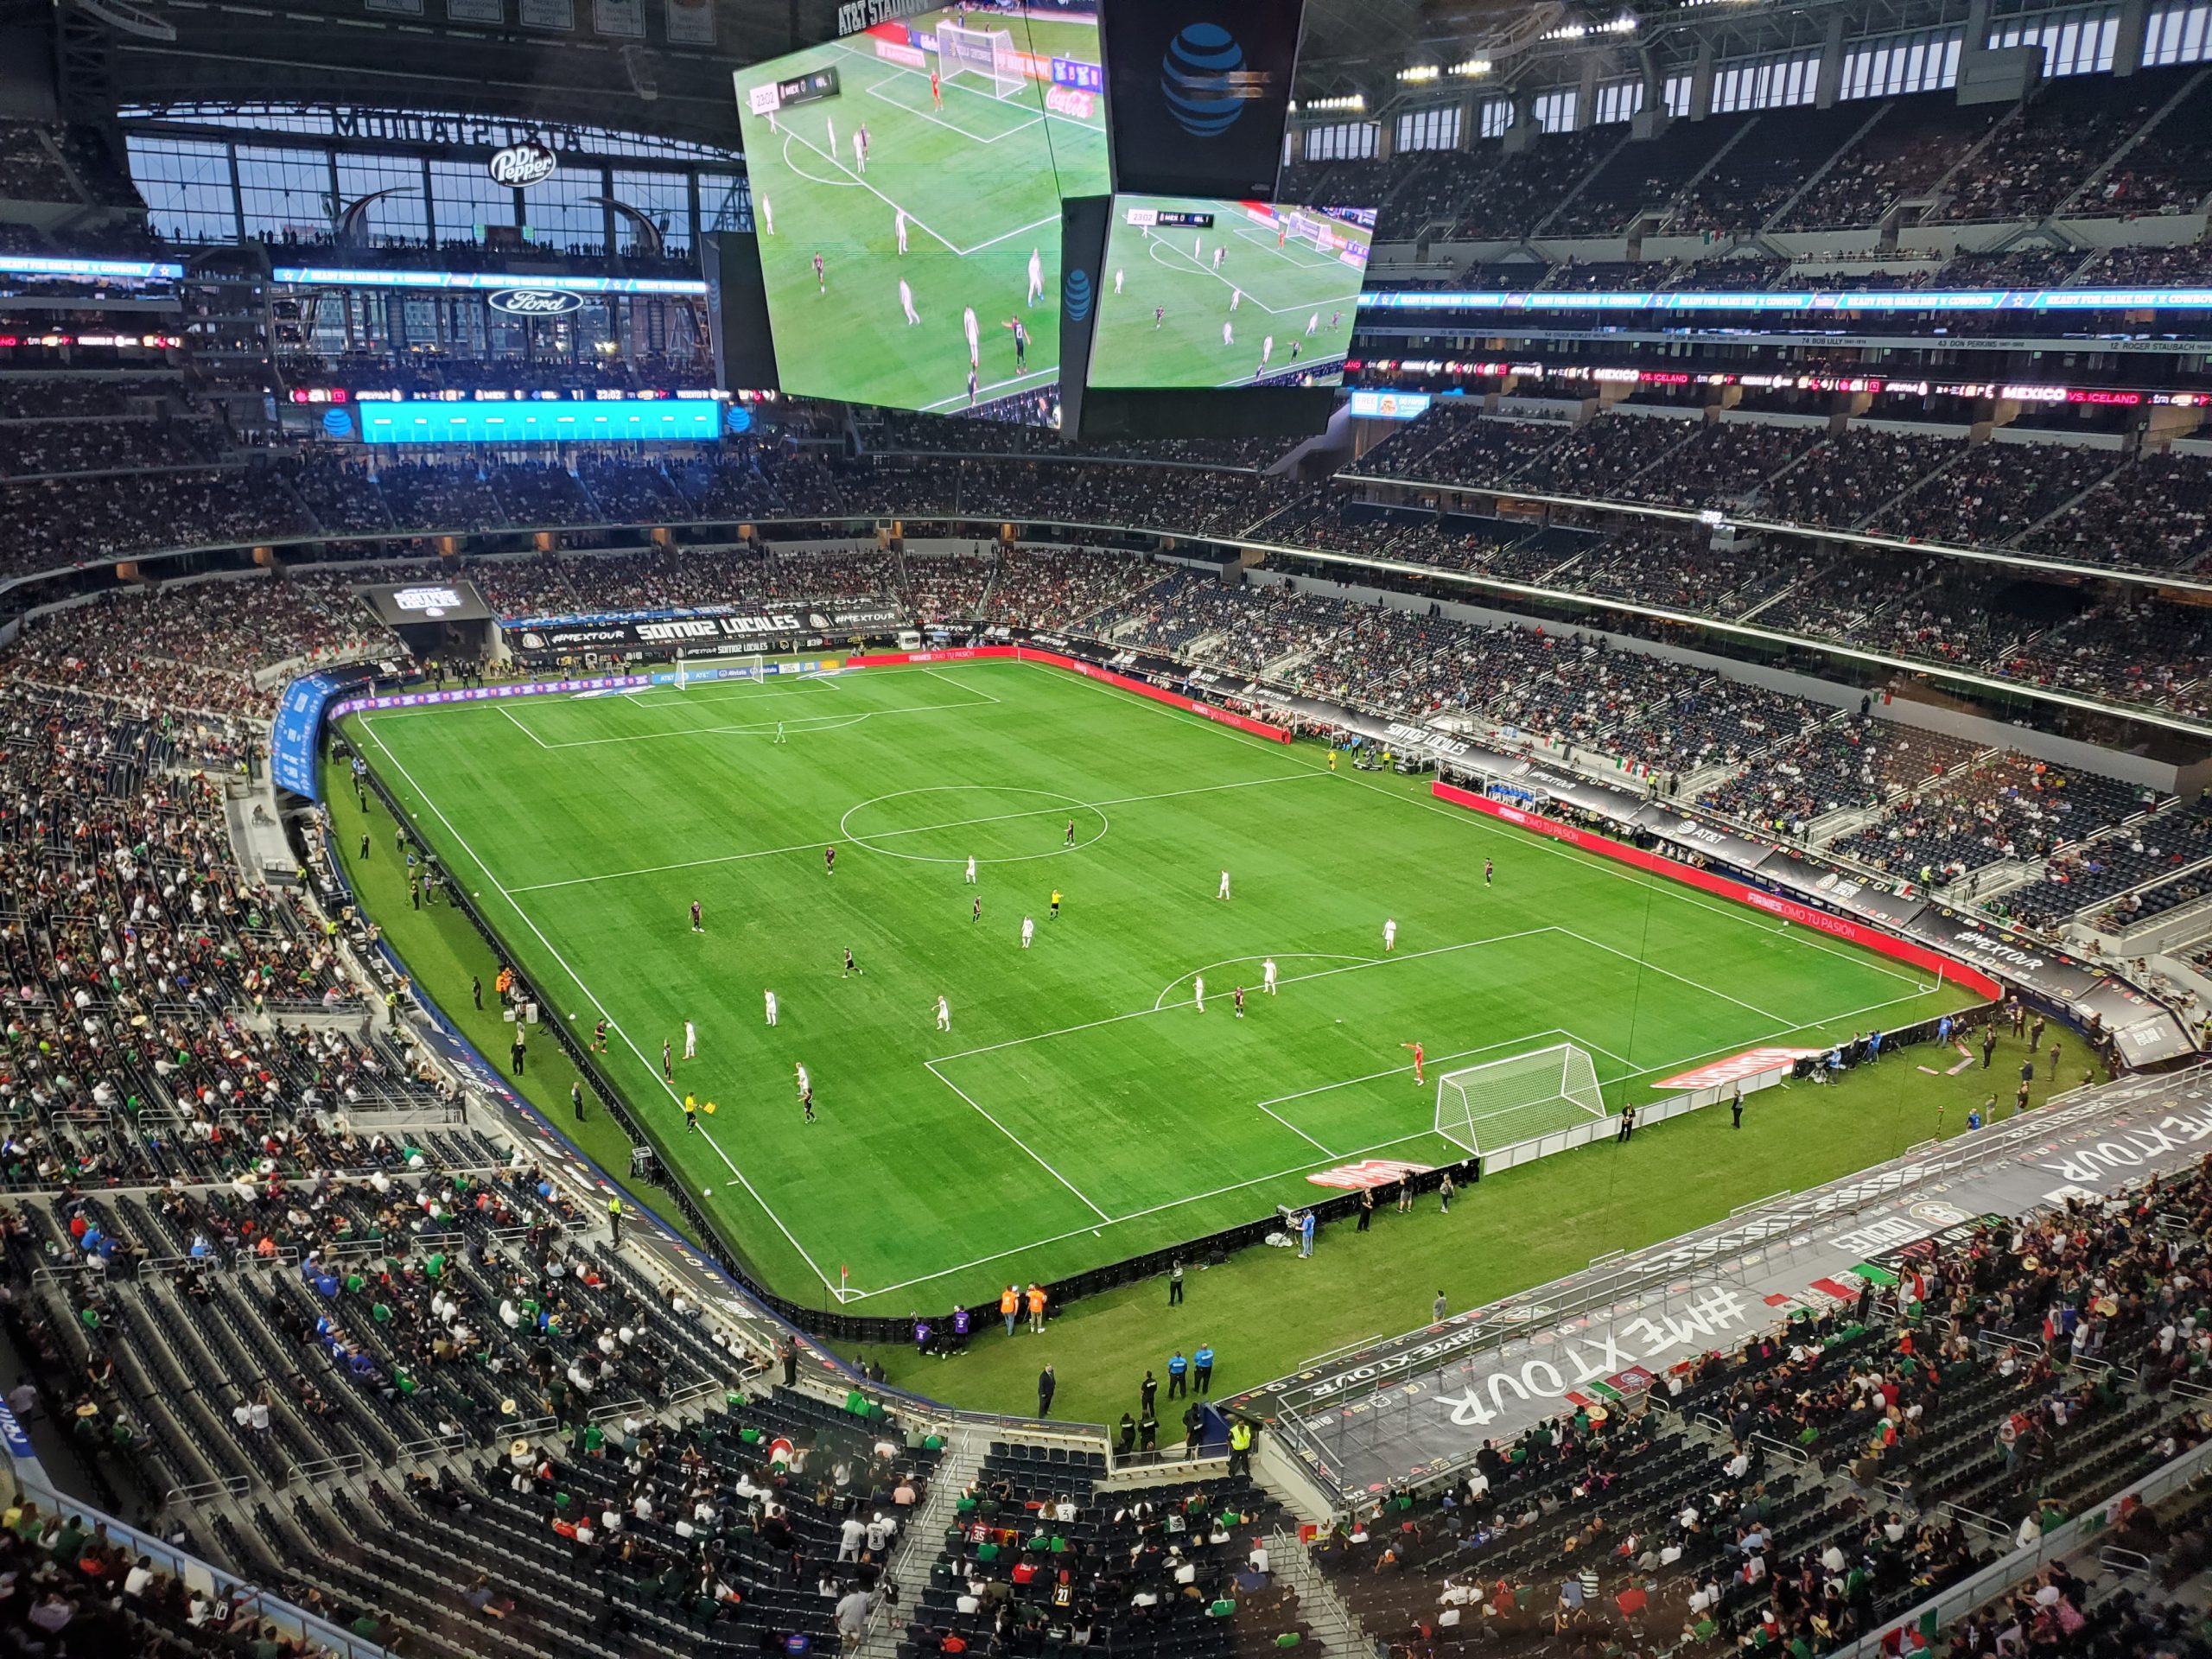 Mexican enjoys a comeback victory over Iceland at AT&T Stadium 3rd Degree